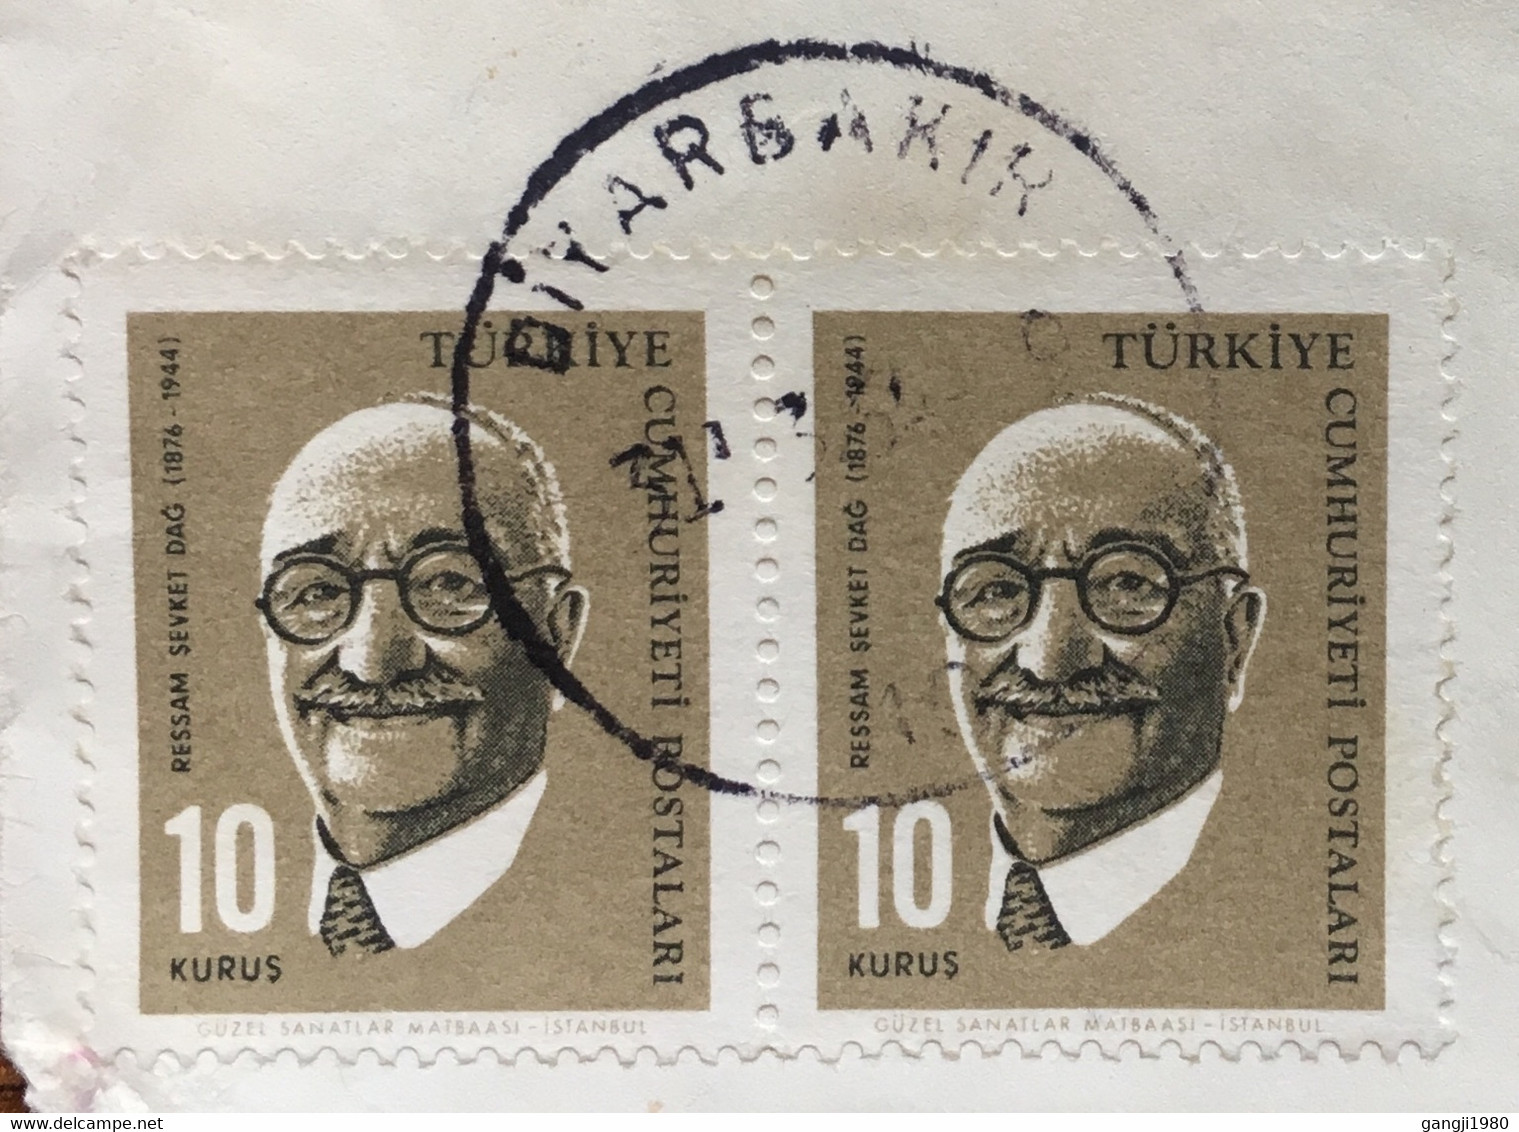 TURKEY 1964, VIGNETTE AIRMAIL LABEL ,POPLIN ARFIL RARE ! 4 STAMPS RESSAM ,CANKAYA ,COVER DIYARBAKIR CITY CANCELLATION TO - Lettres & Documents